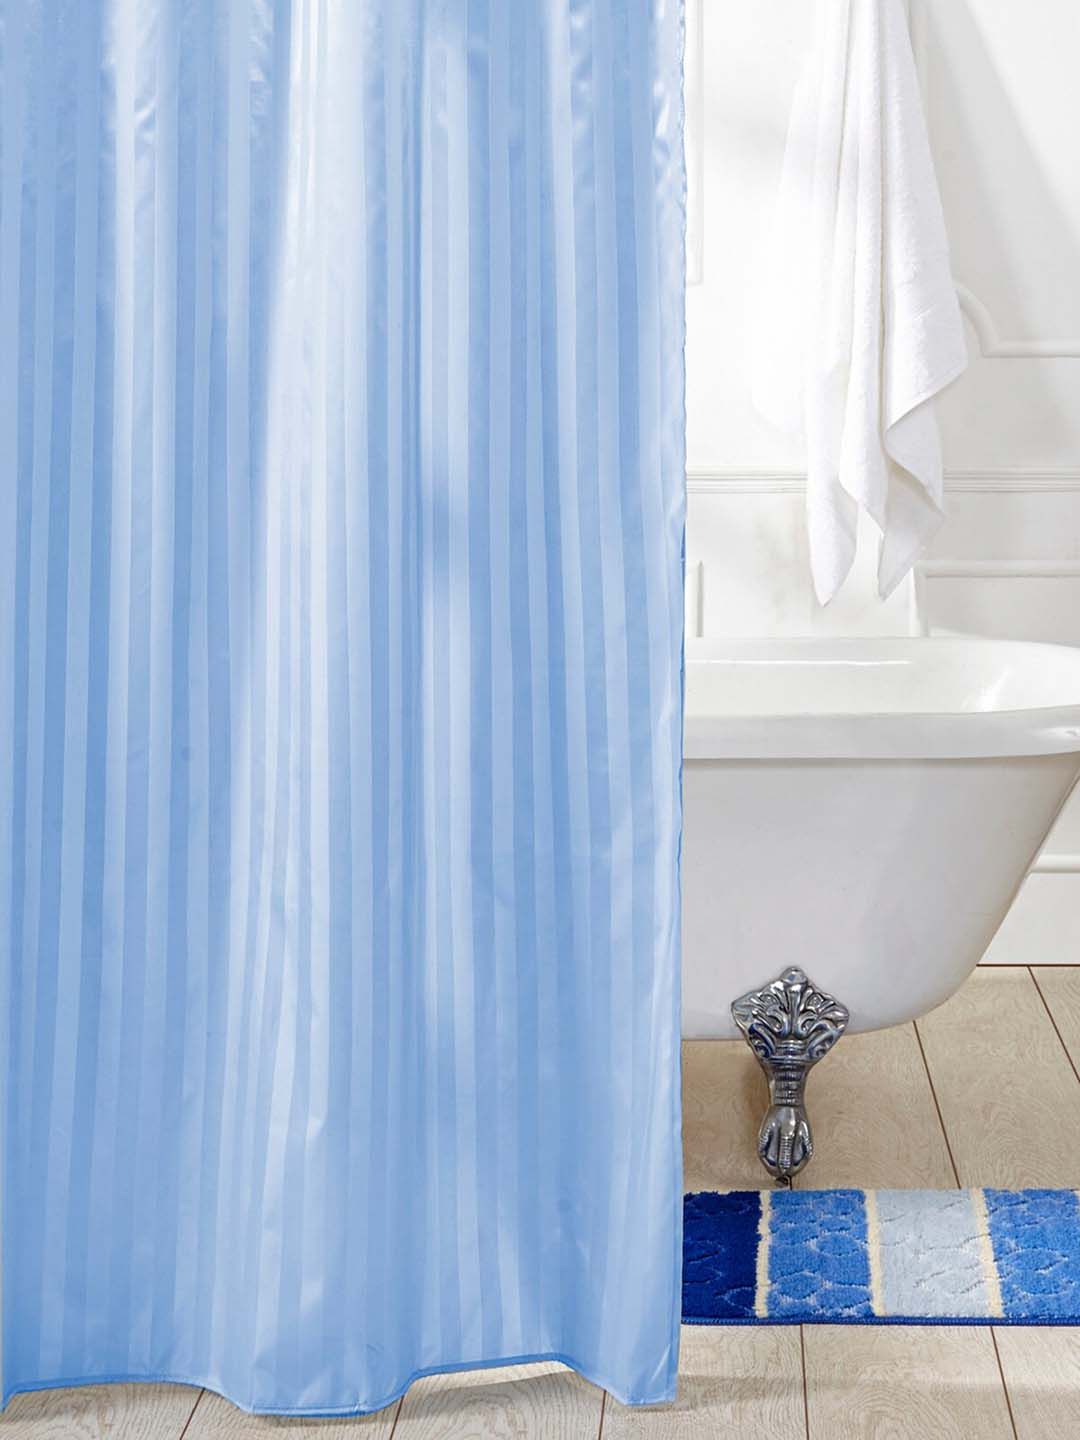 OBSESSIONS Blue Striped Shower Curtain Price in India